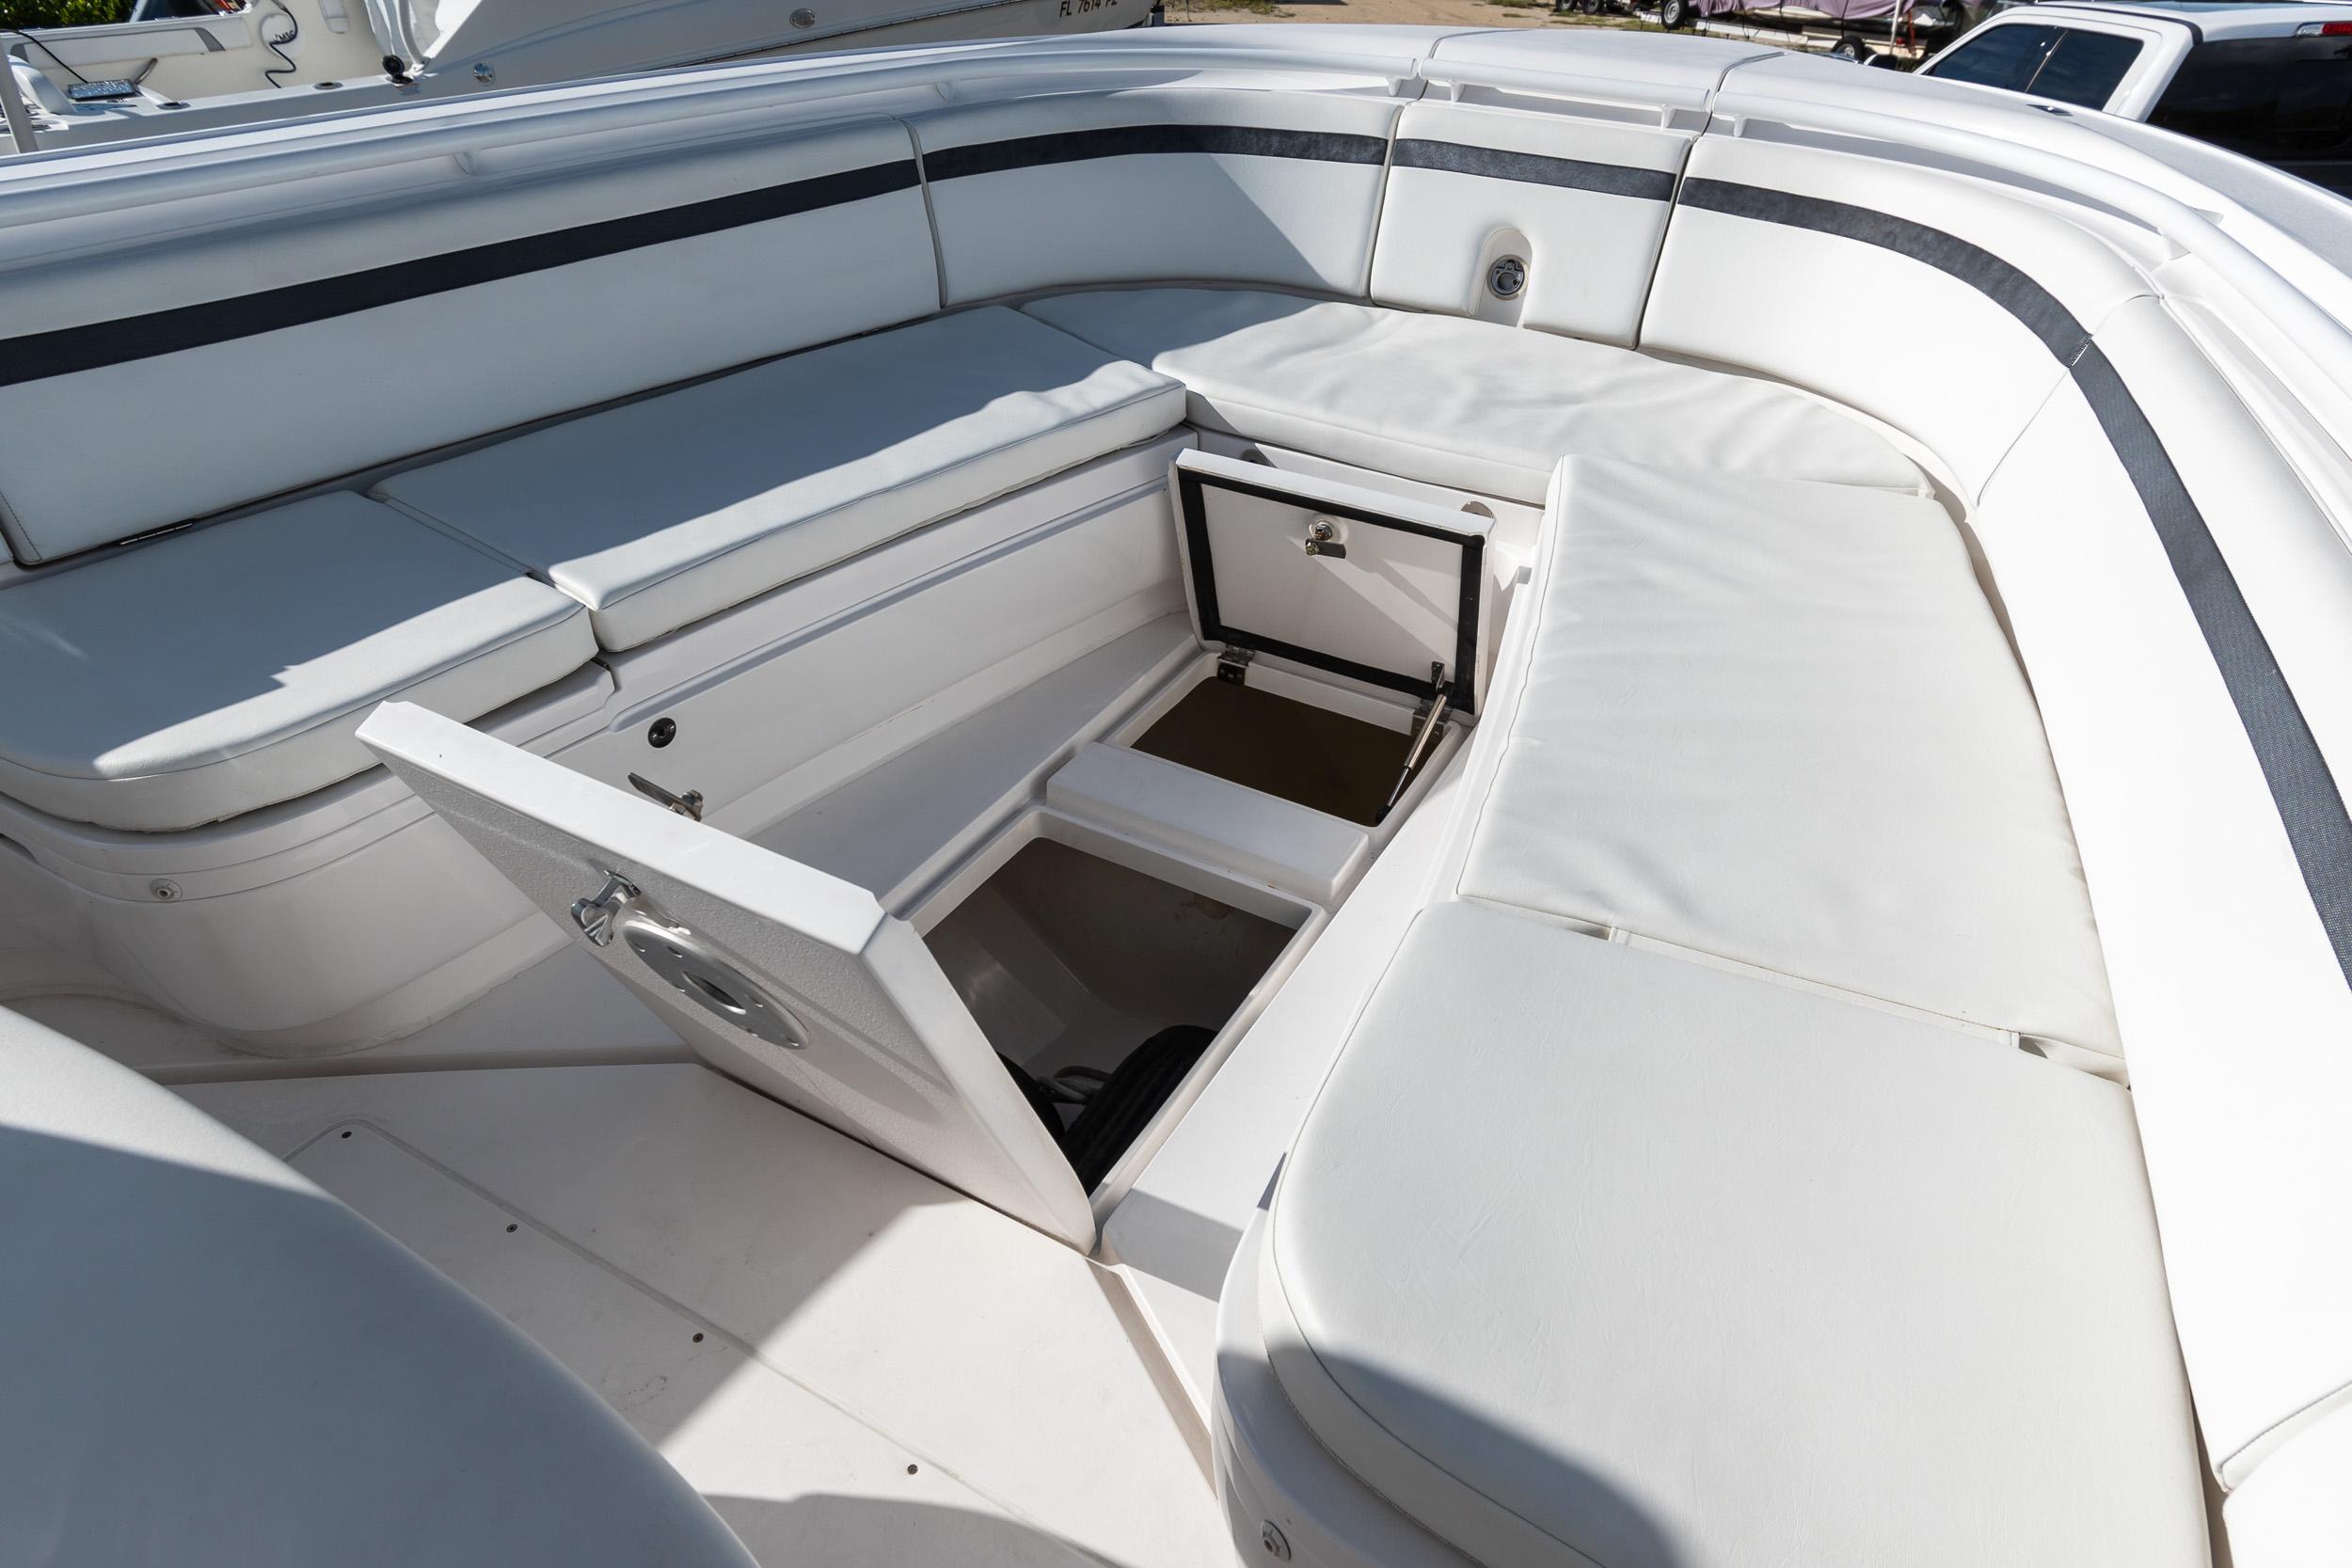 Intrepid 32 Double G - Bow Floor Storage and Bilge Access